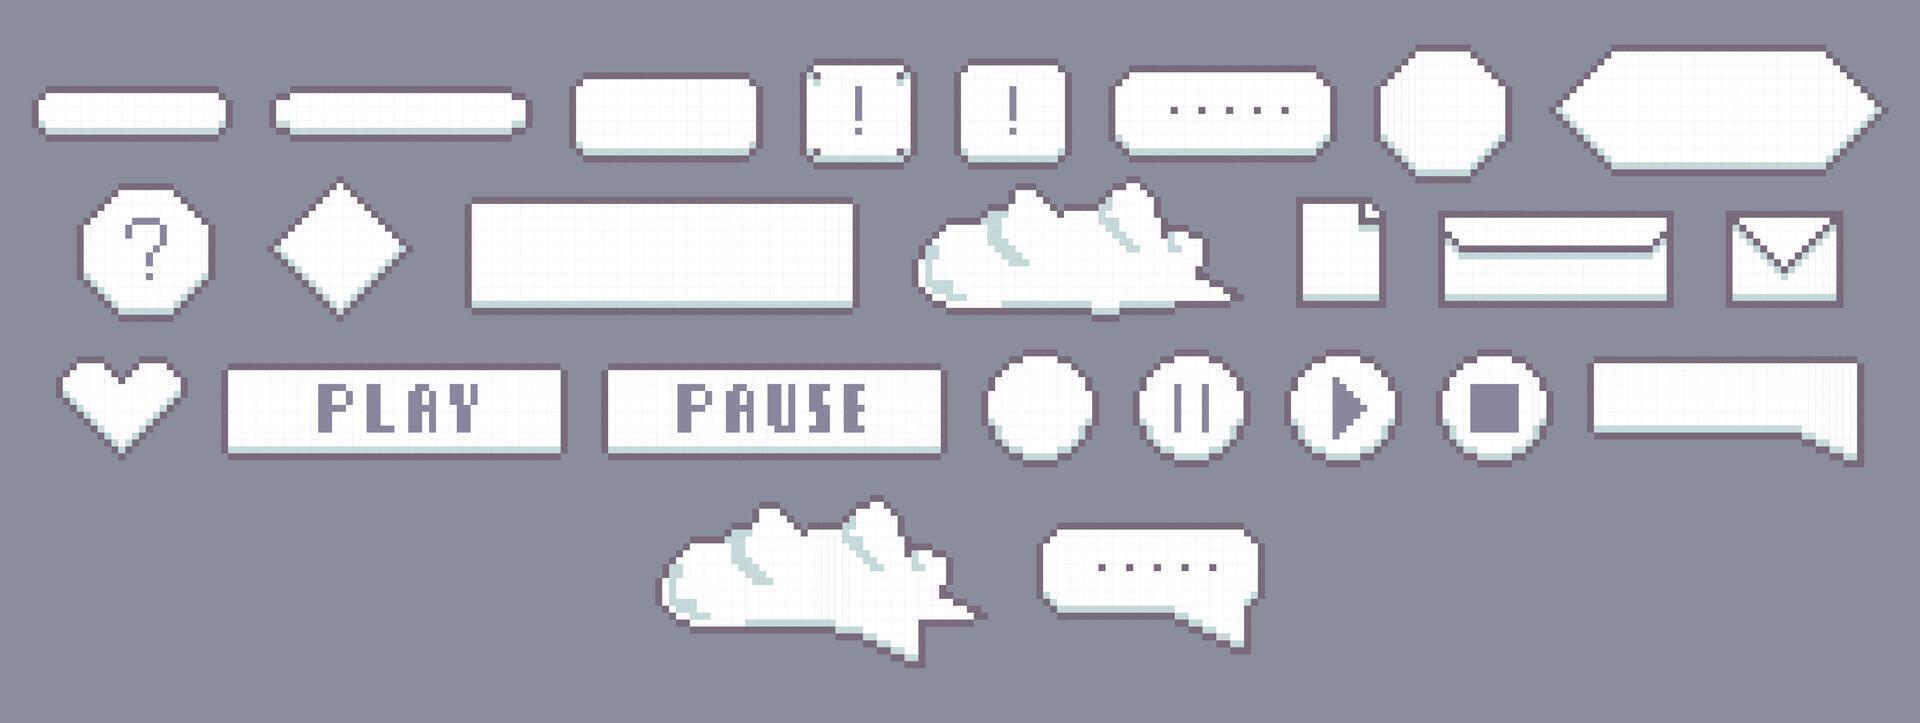 Pixel Art Speech Boxes, Dialogue Boxes Assets for retro Games, speech bubbles messages and quote frames vector set, White and grey set